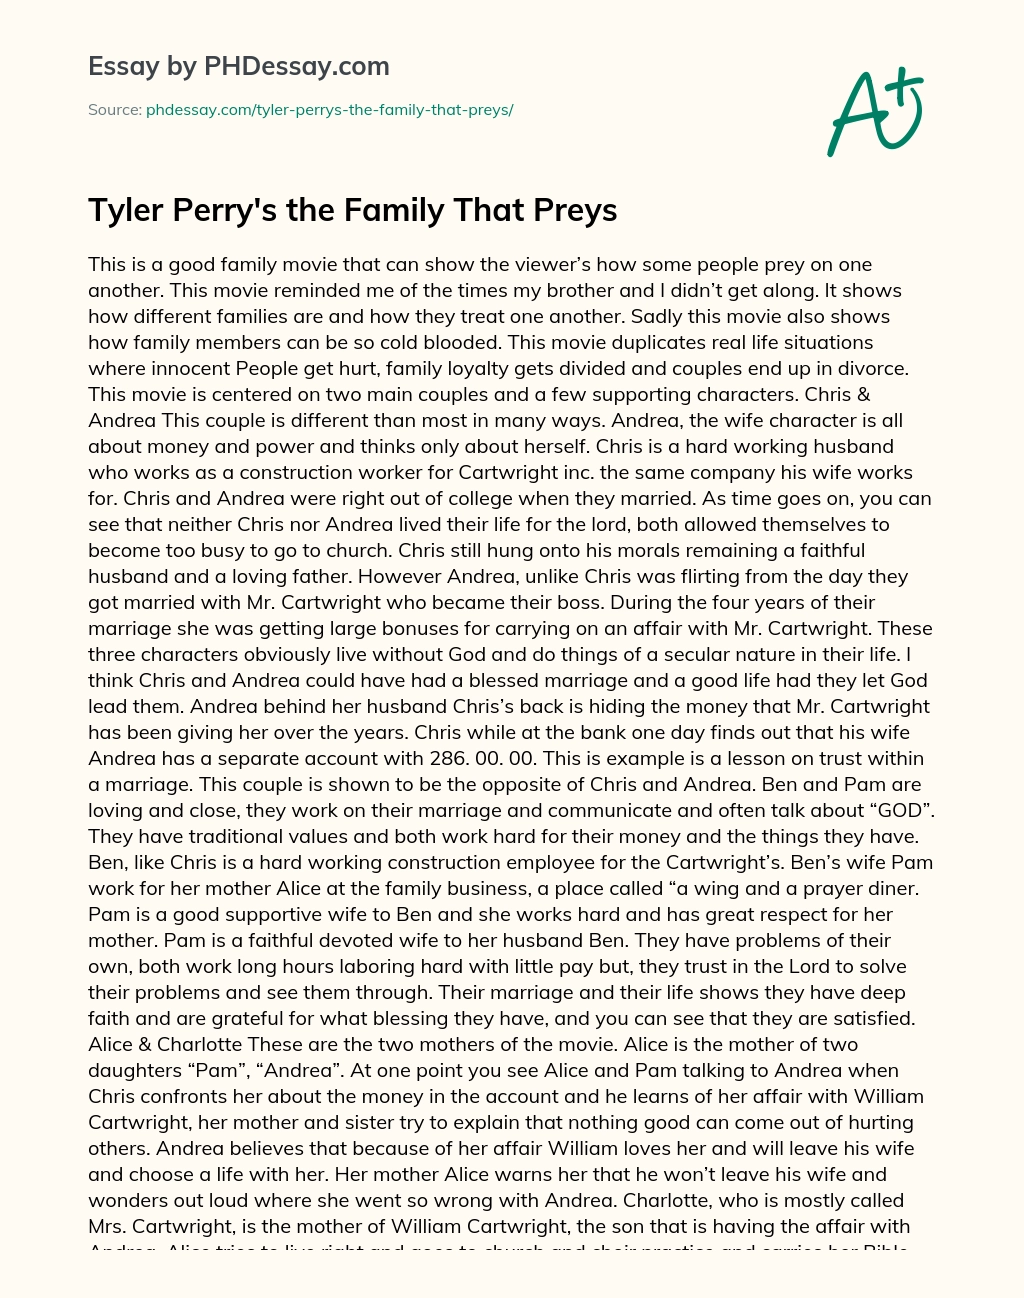 Tyler Perry’s the Family That Preys essay